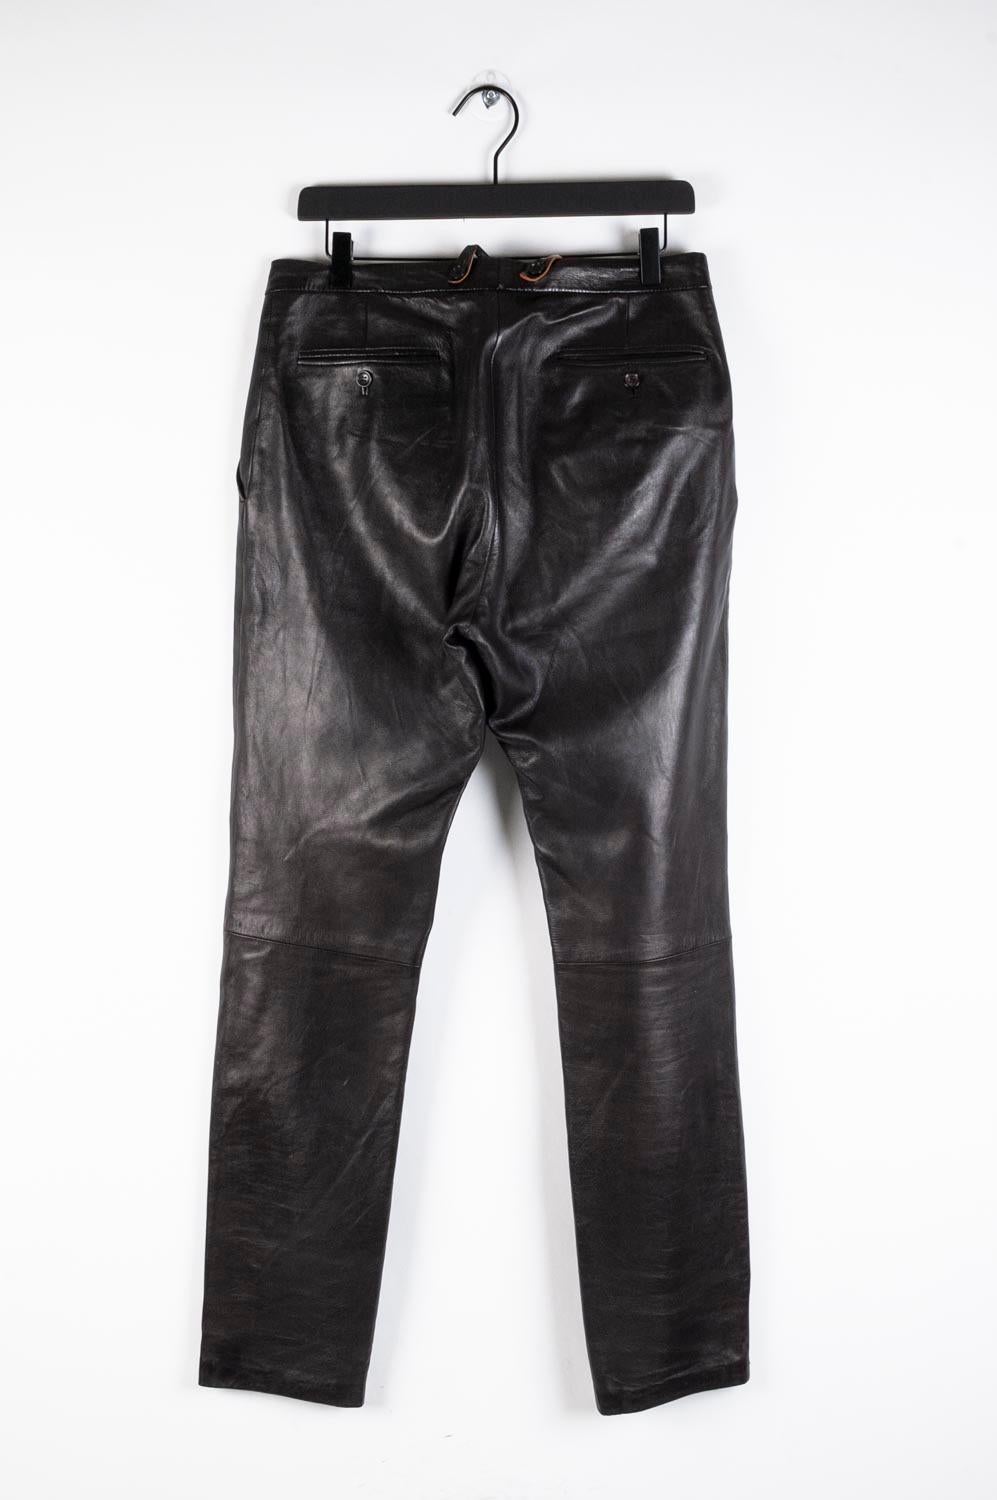 Gucci Leather Men Pants with suspenders Size 48 (M/L) In Good Condition For Sale In Kaunas, LT